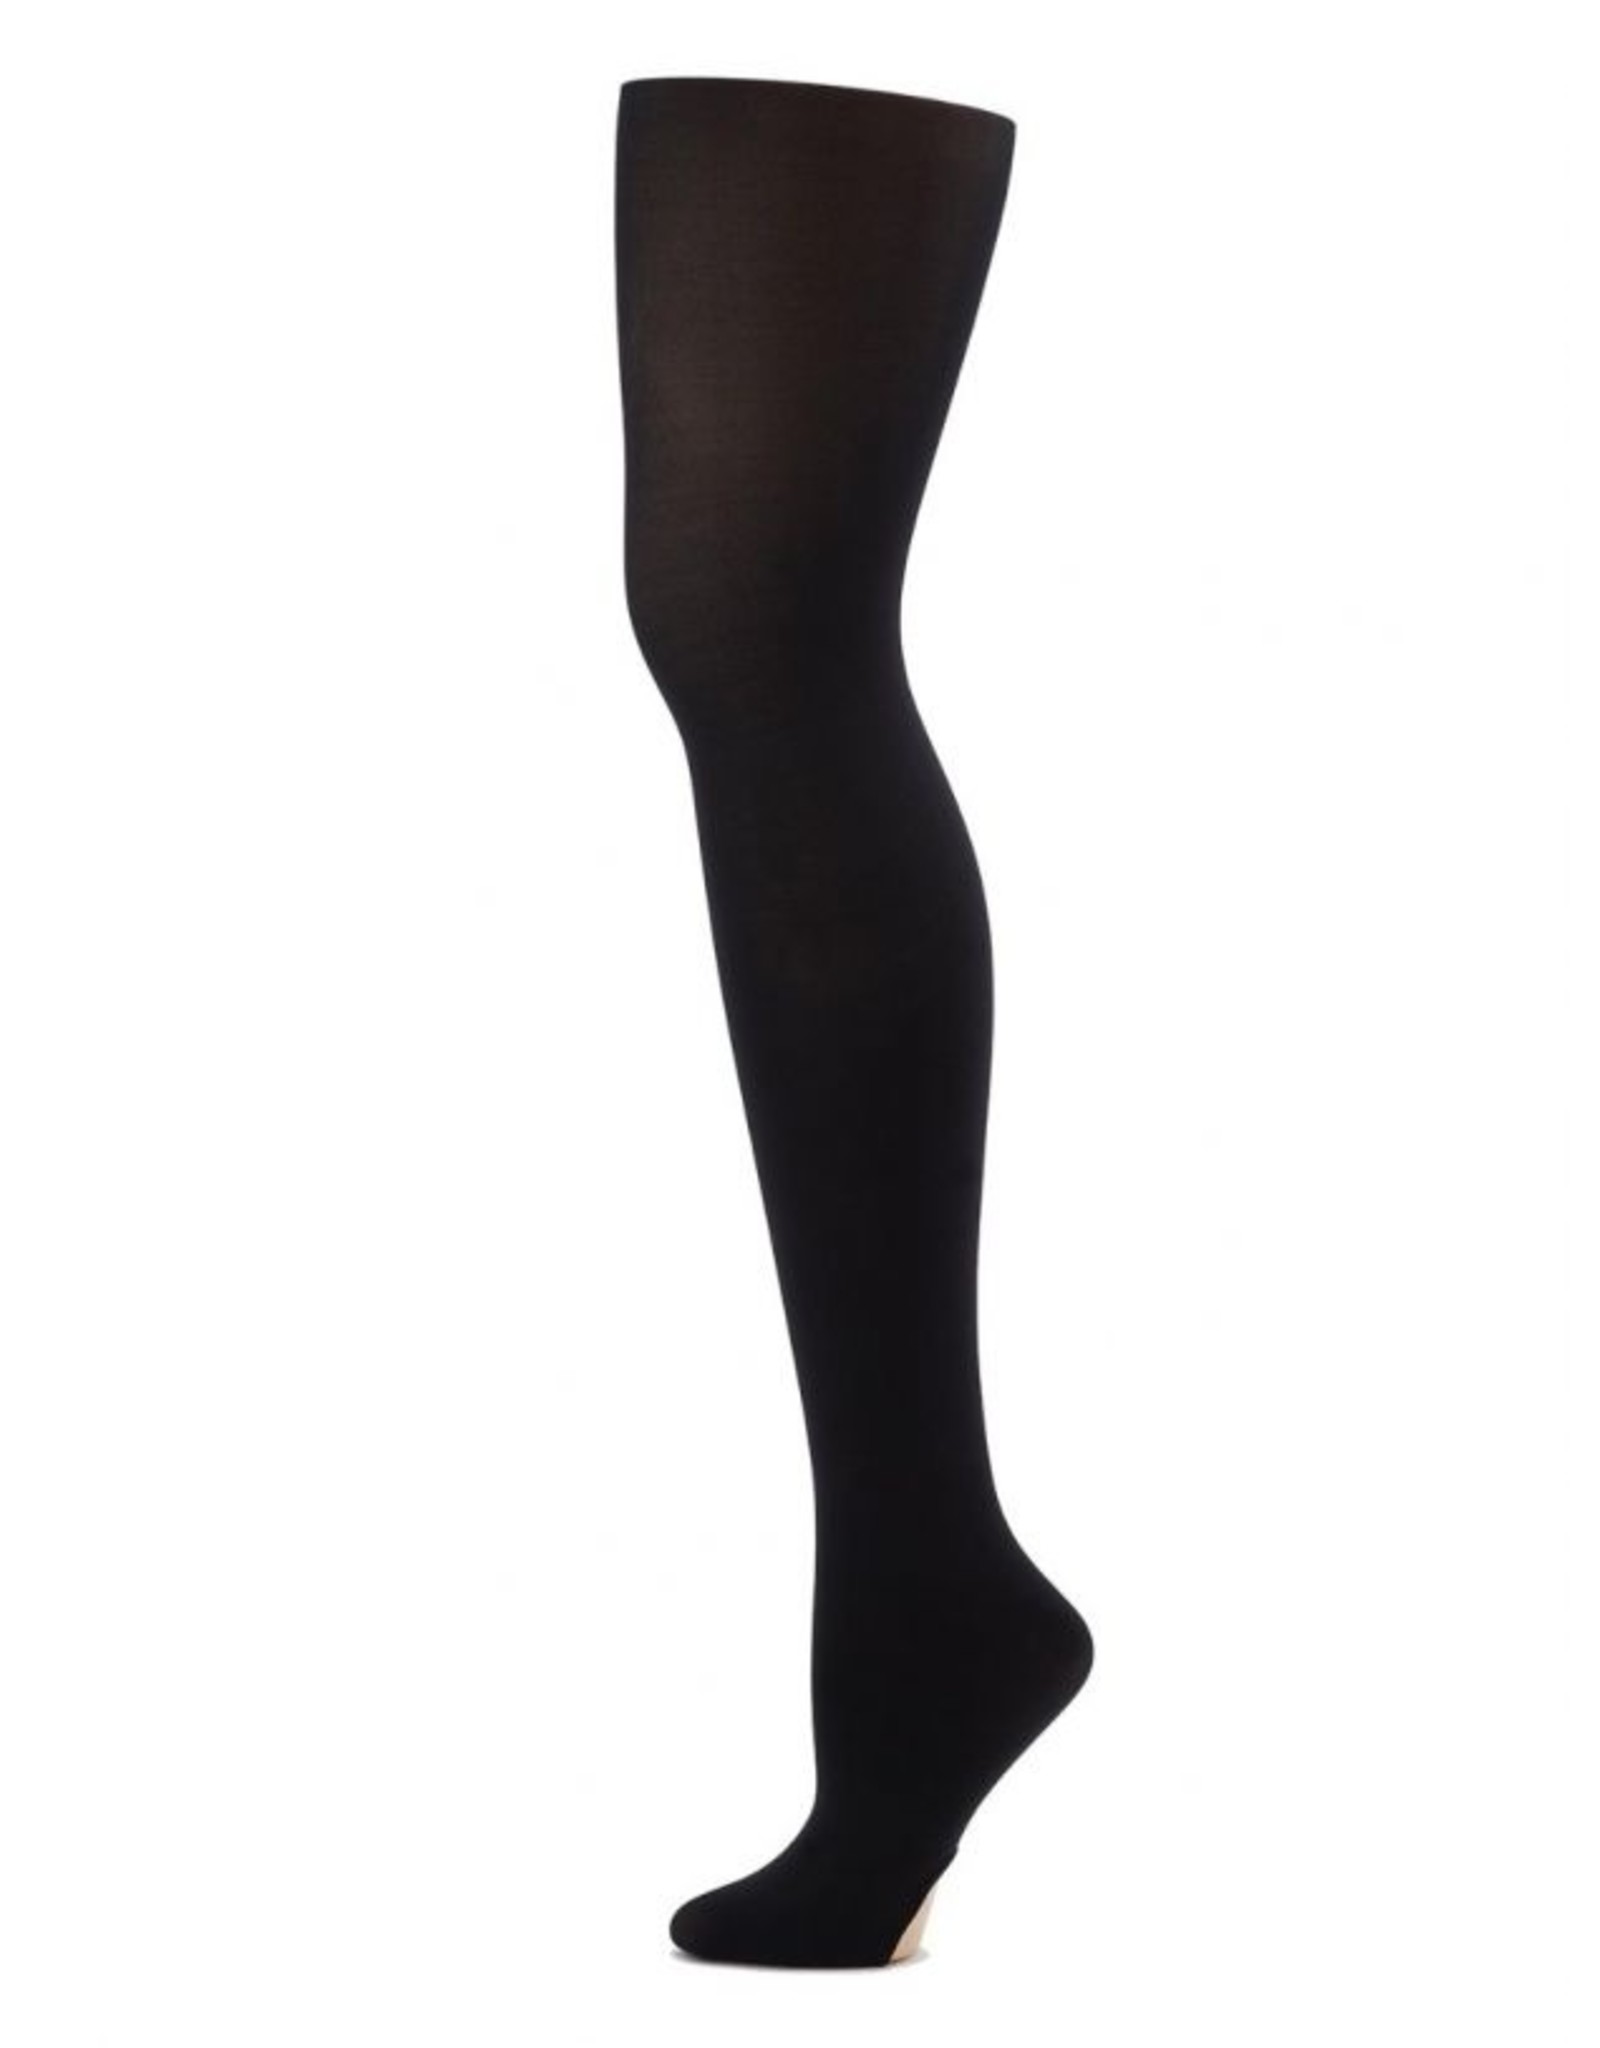 ADULT CAPEZIO TRANSITION TIGHTS - Bodythings